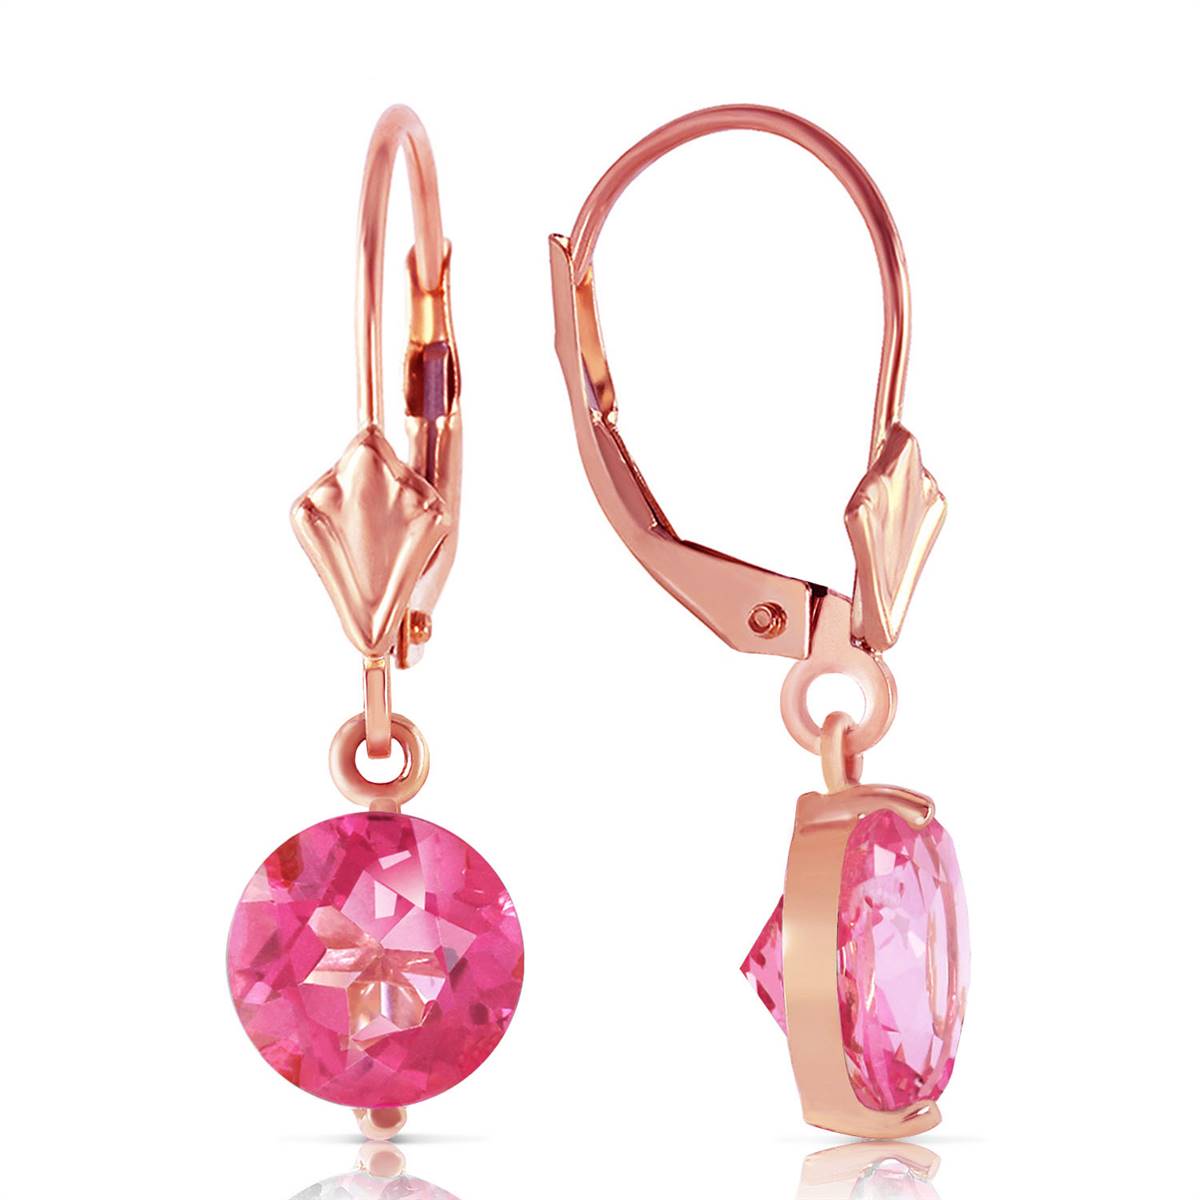 3.1 Carat 14K Solid Rose Gold Youth Pink Topaz Earrings